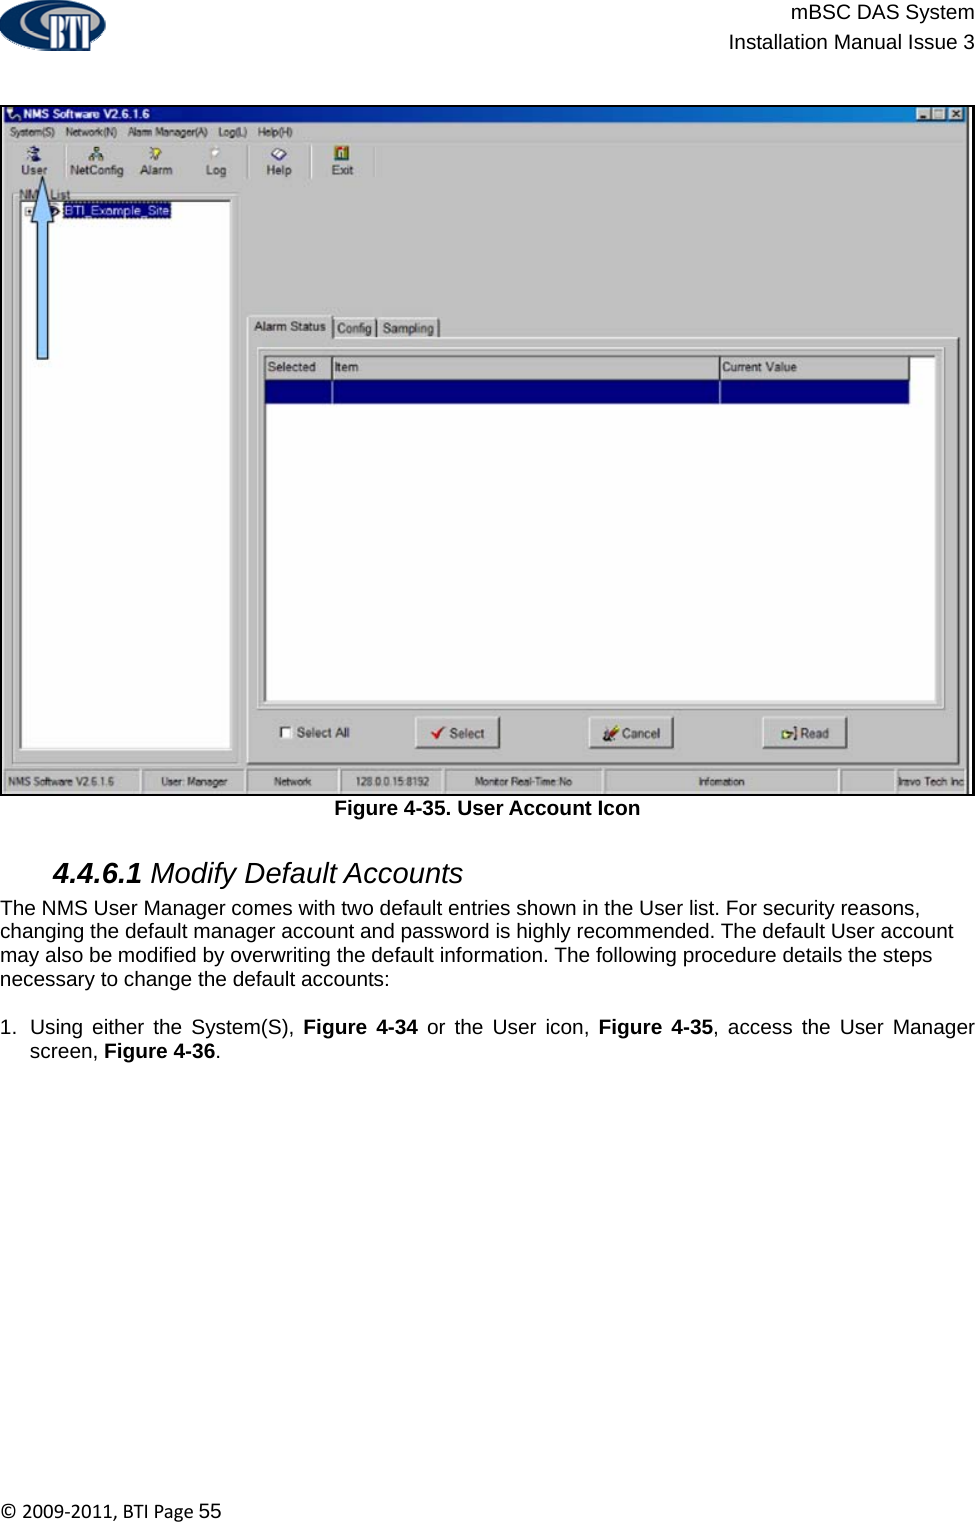                          mBSC DAS System  Installation Manual Issue 3  ©2009‐2011,BTIPage55  Figure 4-35. User Account Icon   4.4.6.1 Modify Default Accounts The NMS User Manager comes with two default entries shown in the User list. For security reasons, changing the default manager account and password is highly recommended. The default User account may also be modified by overwriting the default information. The following procedure details the steps necessary to change the default accounts:  1.  Using either the System(S), Figure 4-34 or the User icon, Figure 4-35, access the User Manager screen, Figure 4-36.  